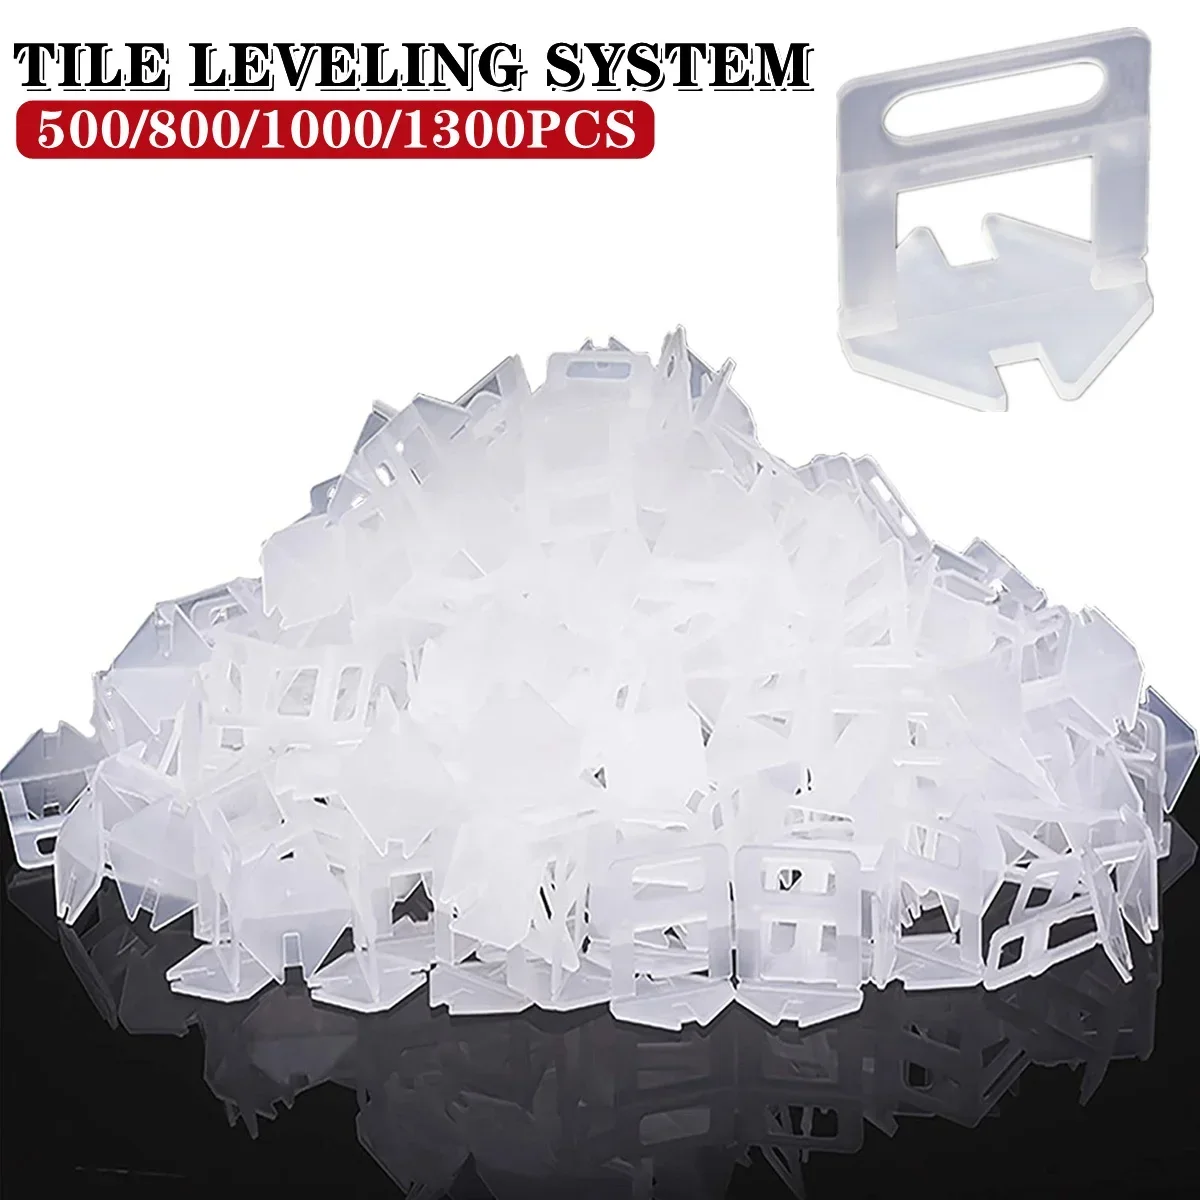 Tile Leveling System Clips 500-1300Pcs Tile Spacers 1MM-3MM for Ceramic Wall Tile Laying Construction Tools  Leveler Spacers new tile leveling system tool kit level wedges alignment spacers for leveler locator spacers plier flooring wall tile